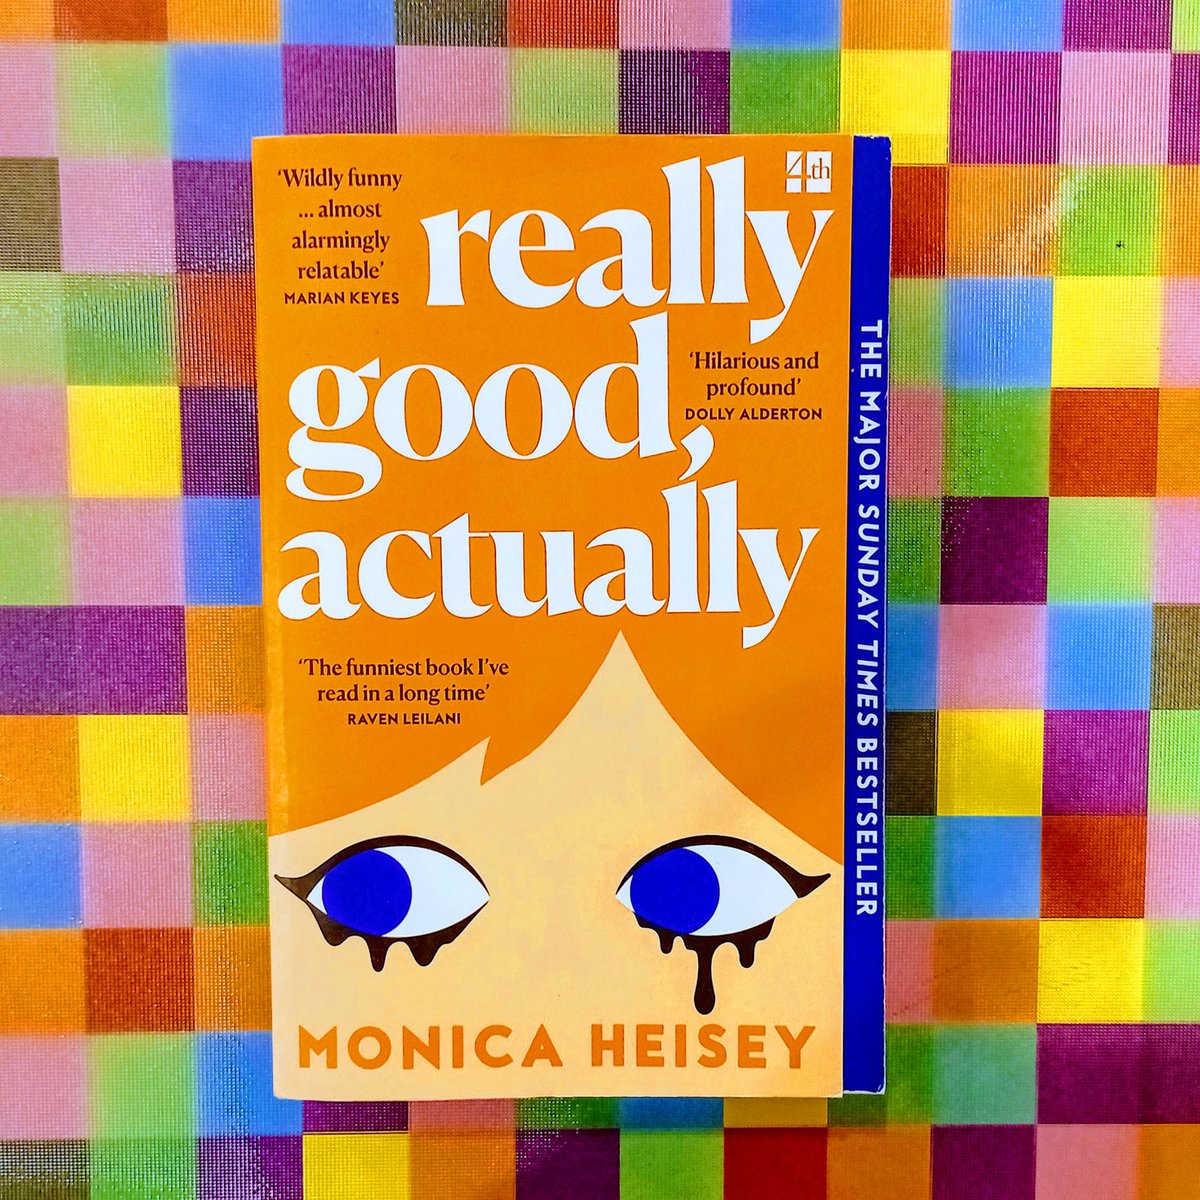 If you’ll pardon the pun, this book was, indeed, really good, actually and I’d recommend it if you’re looking for a read that gives you the highs and lows of your favourite sitcom #monicaheisey

entirelyfictitious.wordpress.com/2023/12/20/rea…